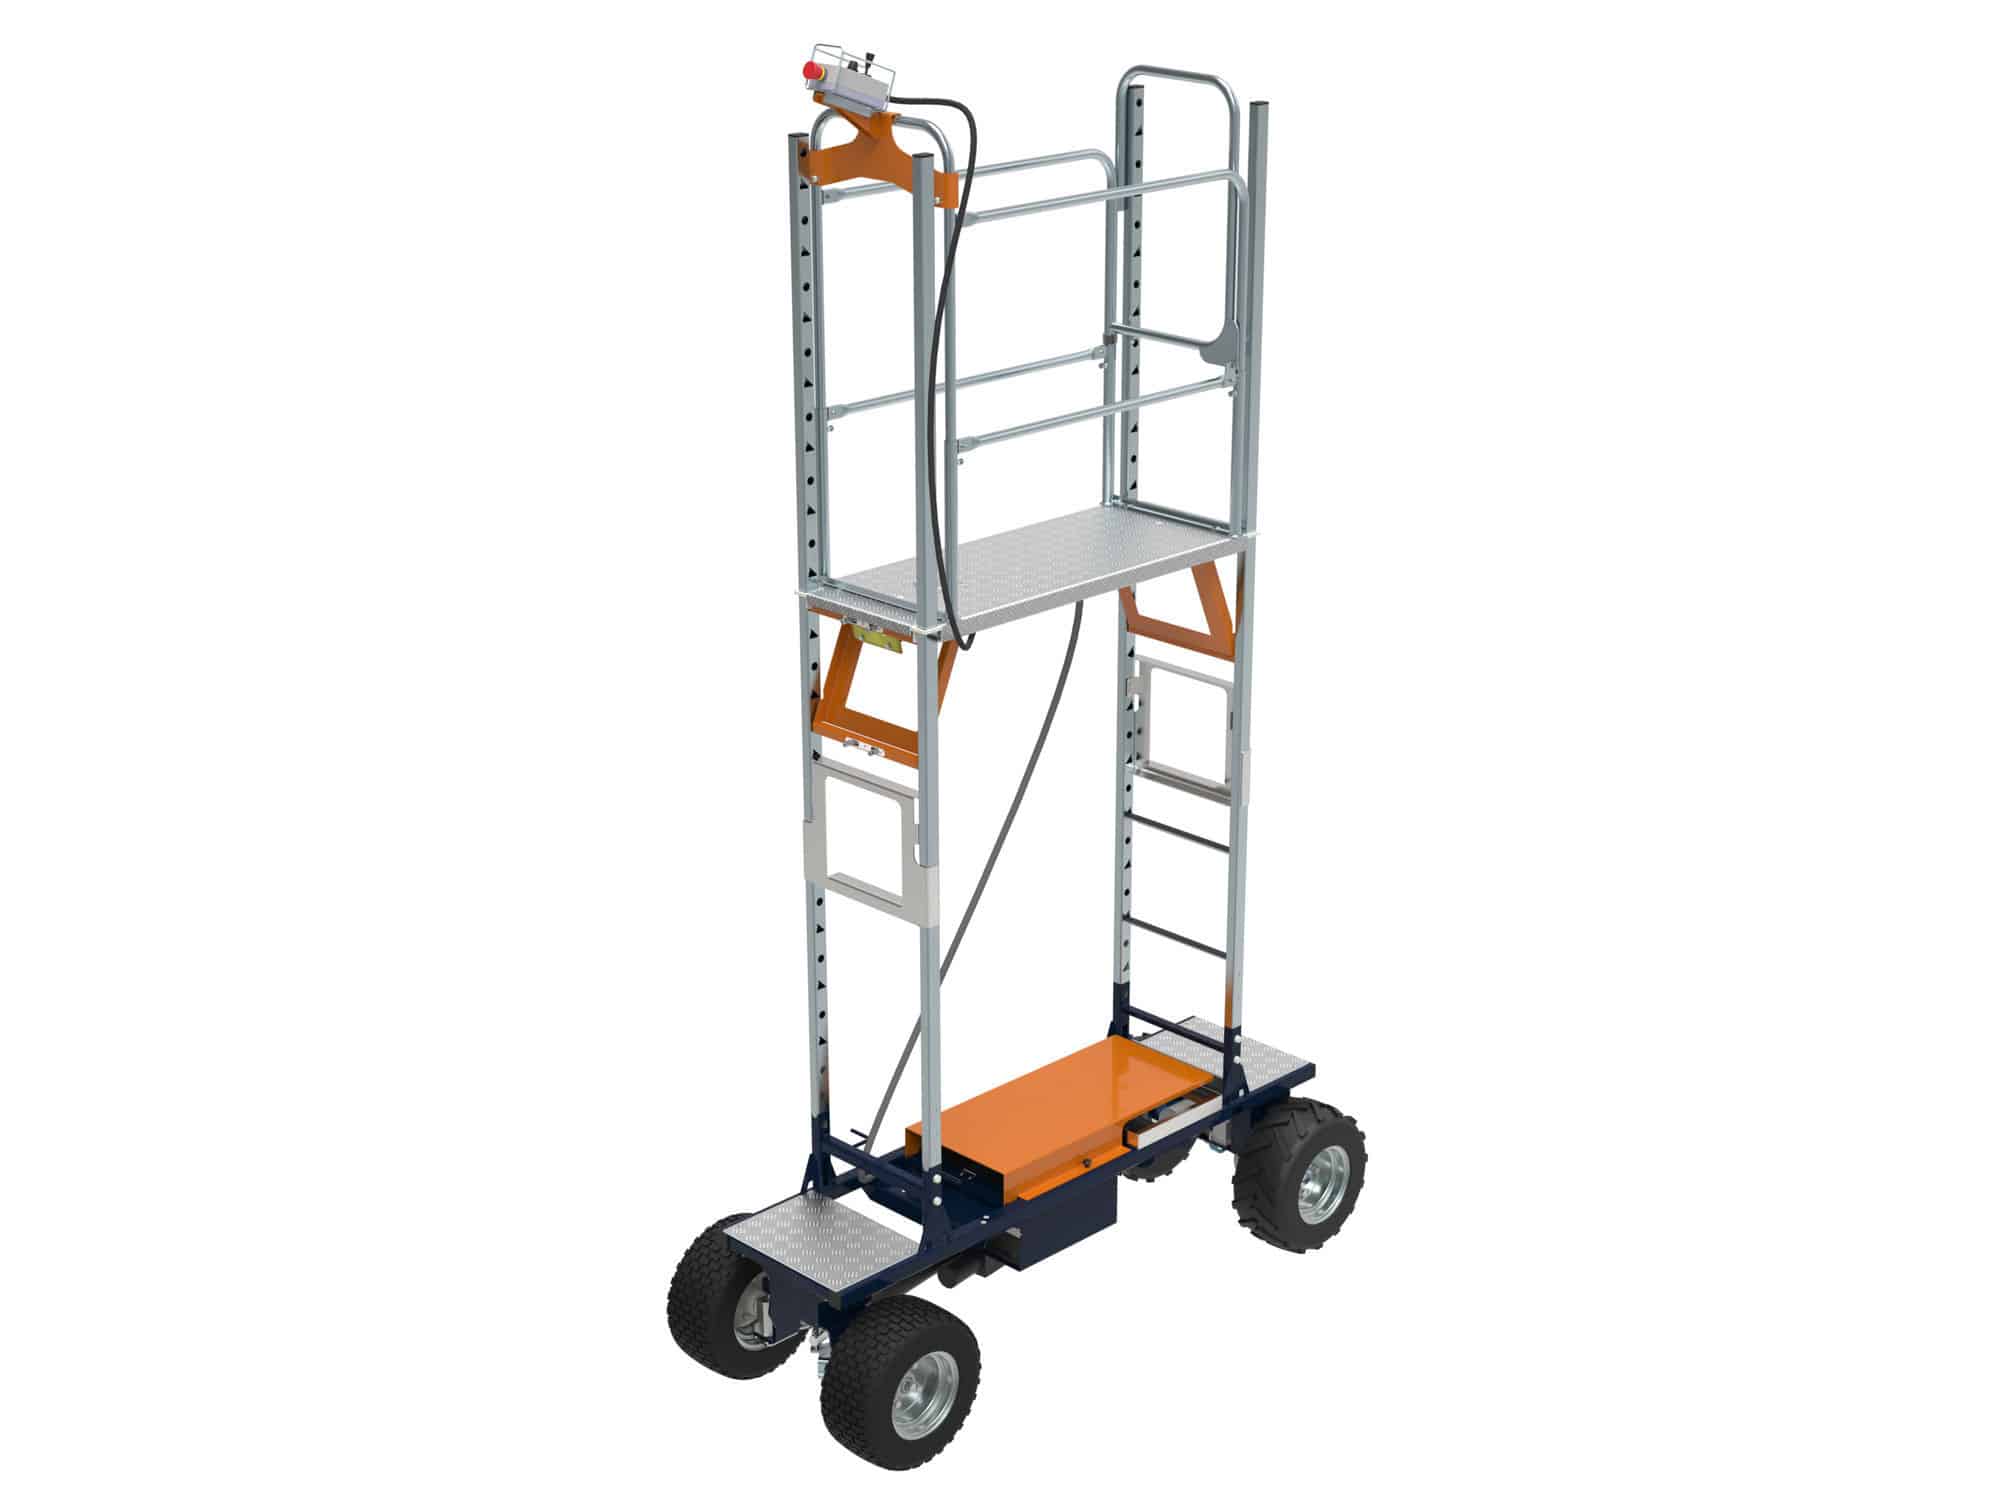 Global Harvest Trolley market was valued at 421.13 Million US$ in 2018 and is projected to reach 525.53 Million US$ by 2024